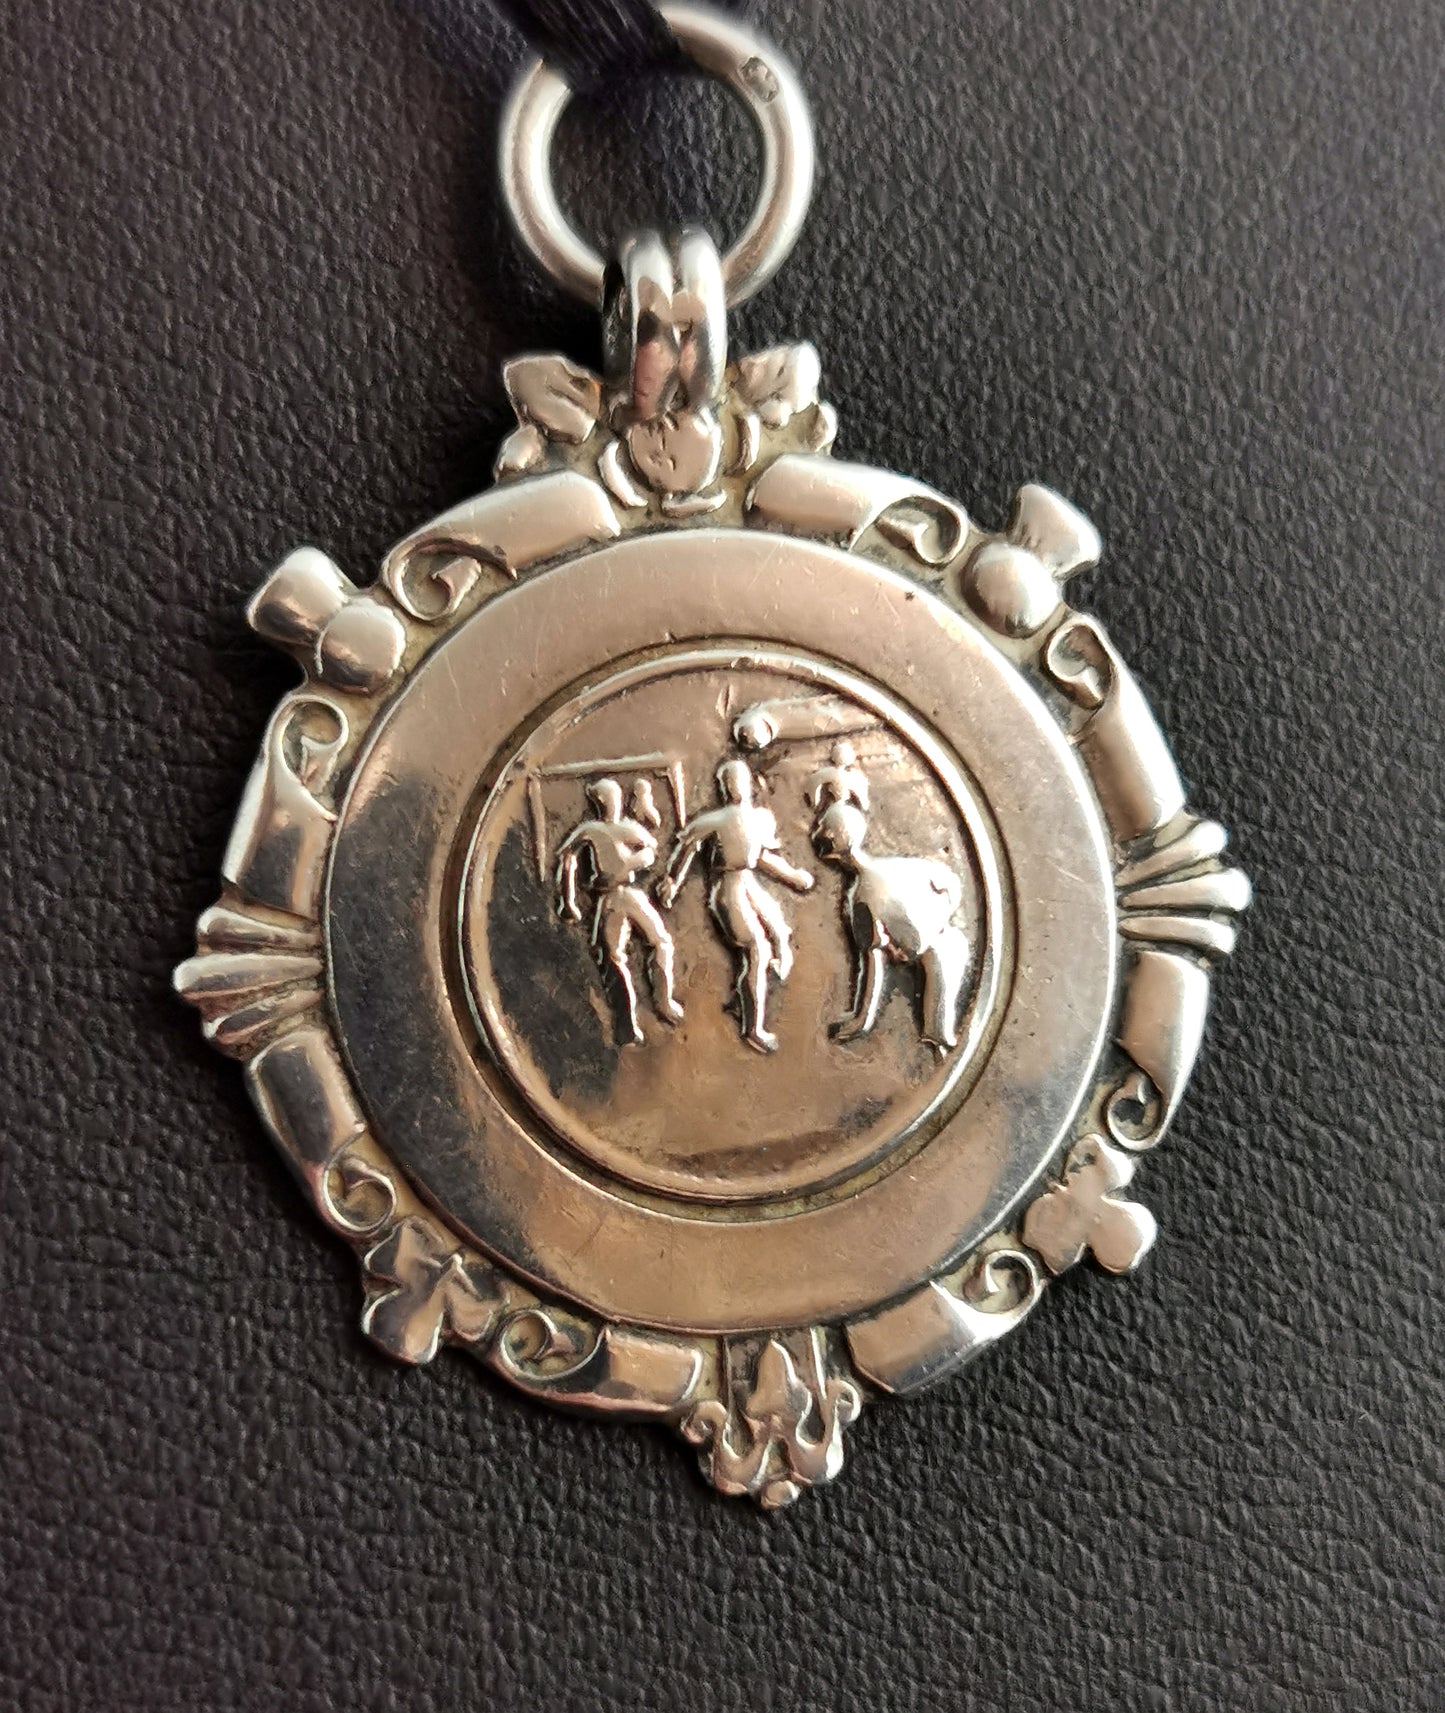 Vintage sterling silver fob pendant, watch fob, Football 1940s